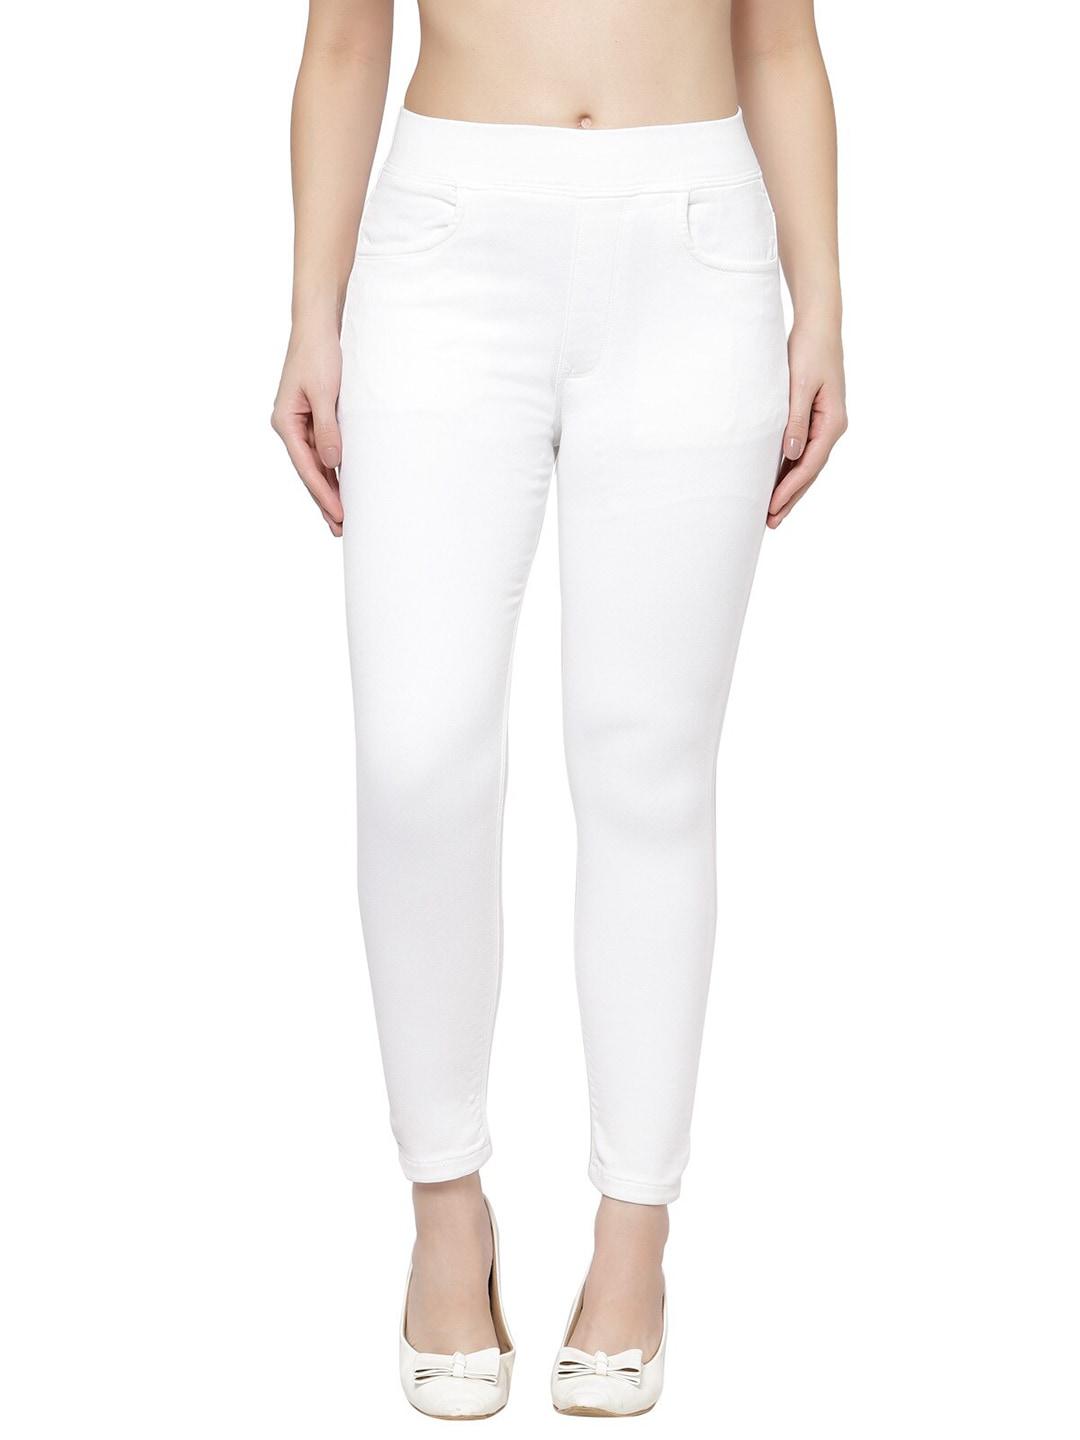 prag-&-co-women-white-solid-skinny-fit-super-combed-cotton-jeggings